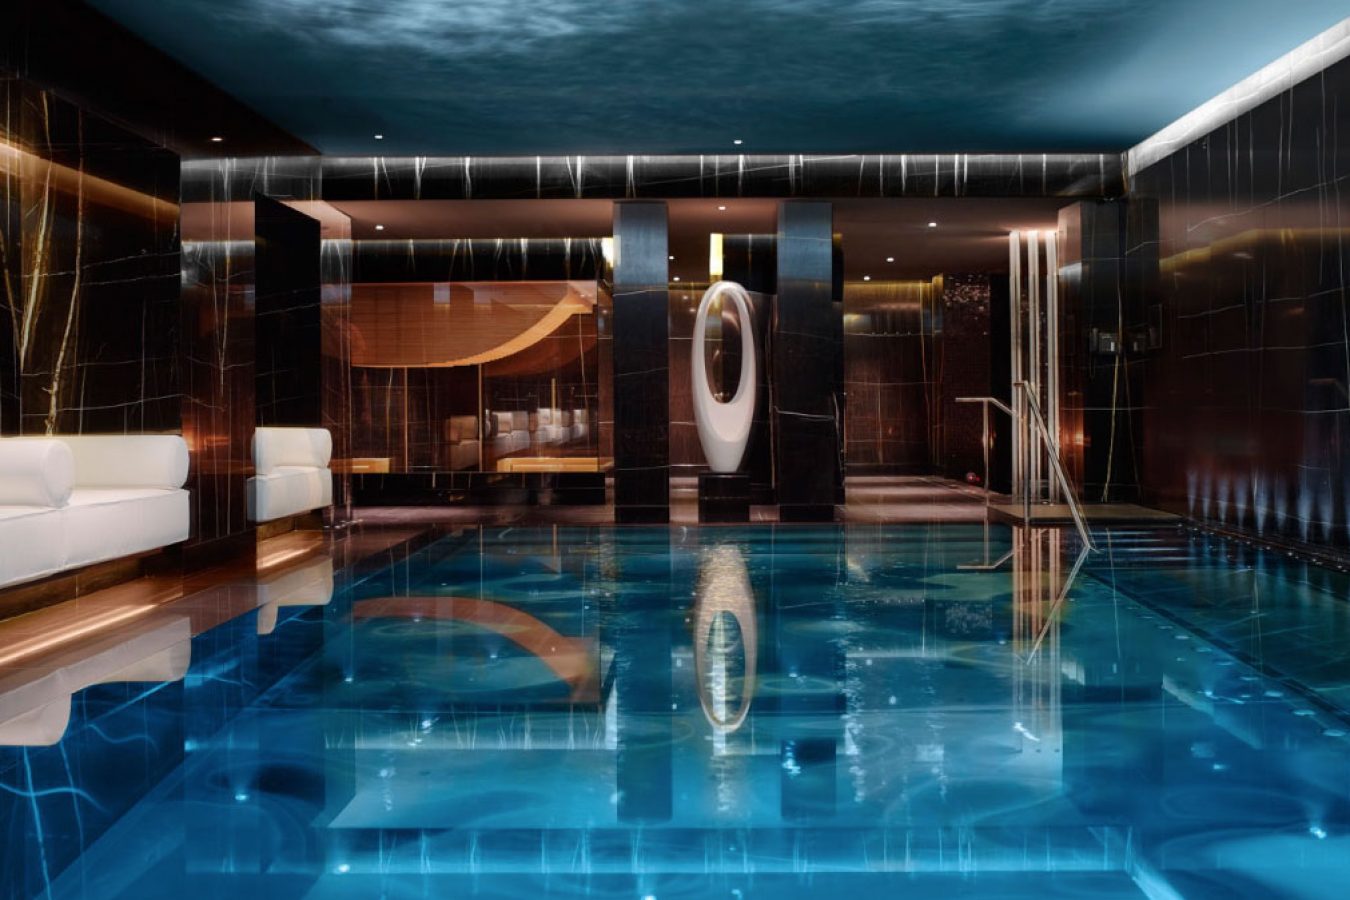 For A Holistic Weekend In London: ESPA Life at the Corinthia Hotel